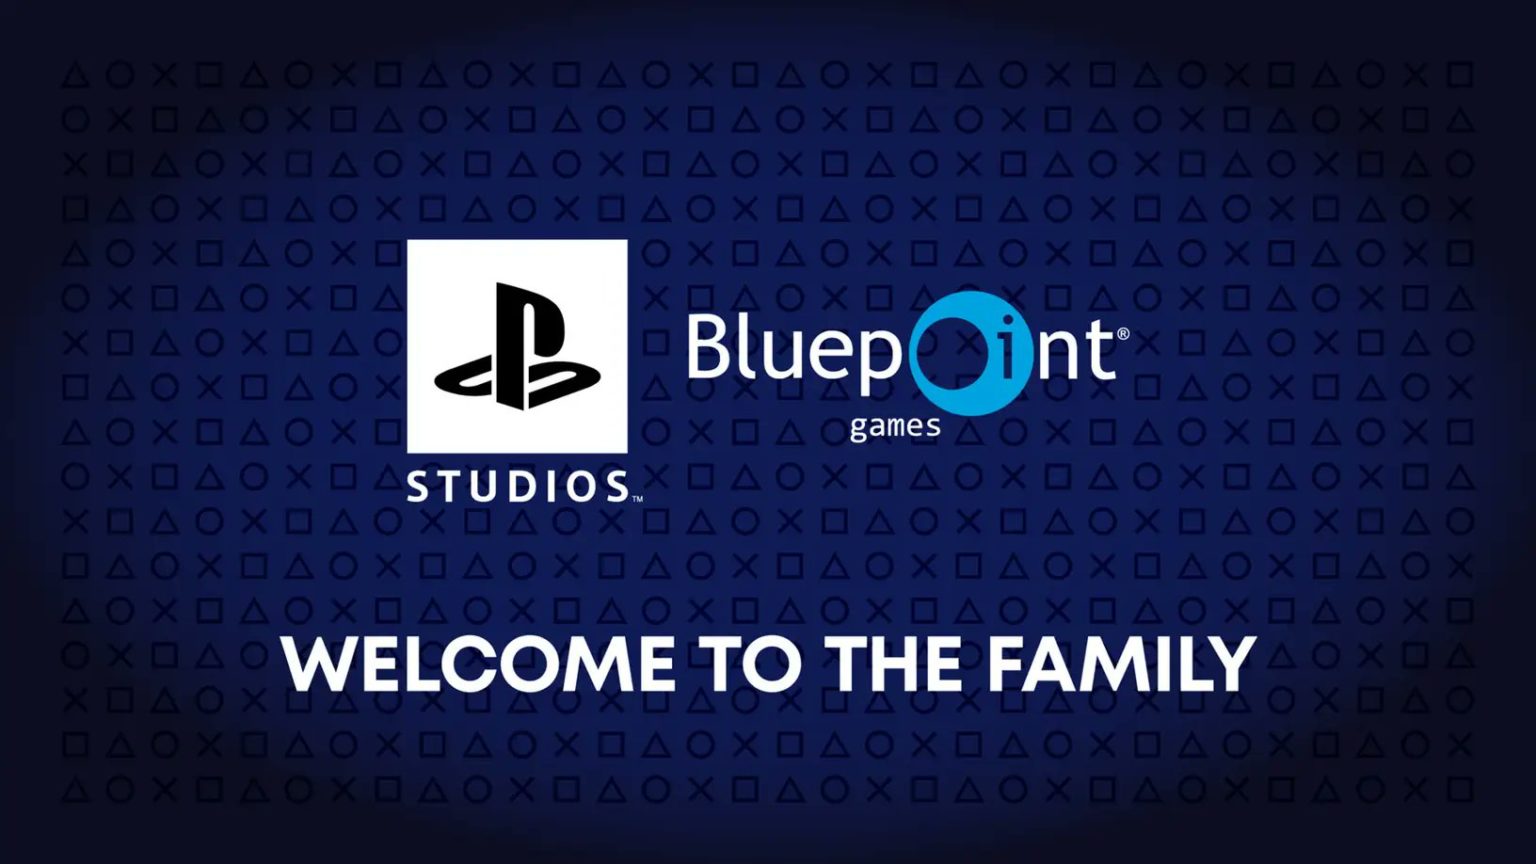 Sony acquired Bluepoint Games and announced the 16th developer for PlayStation Studios.